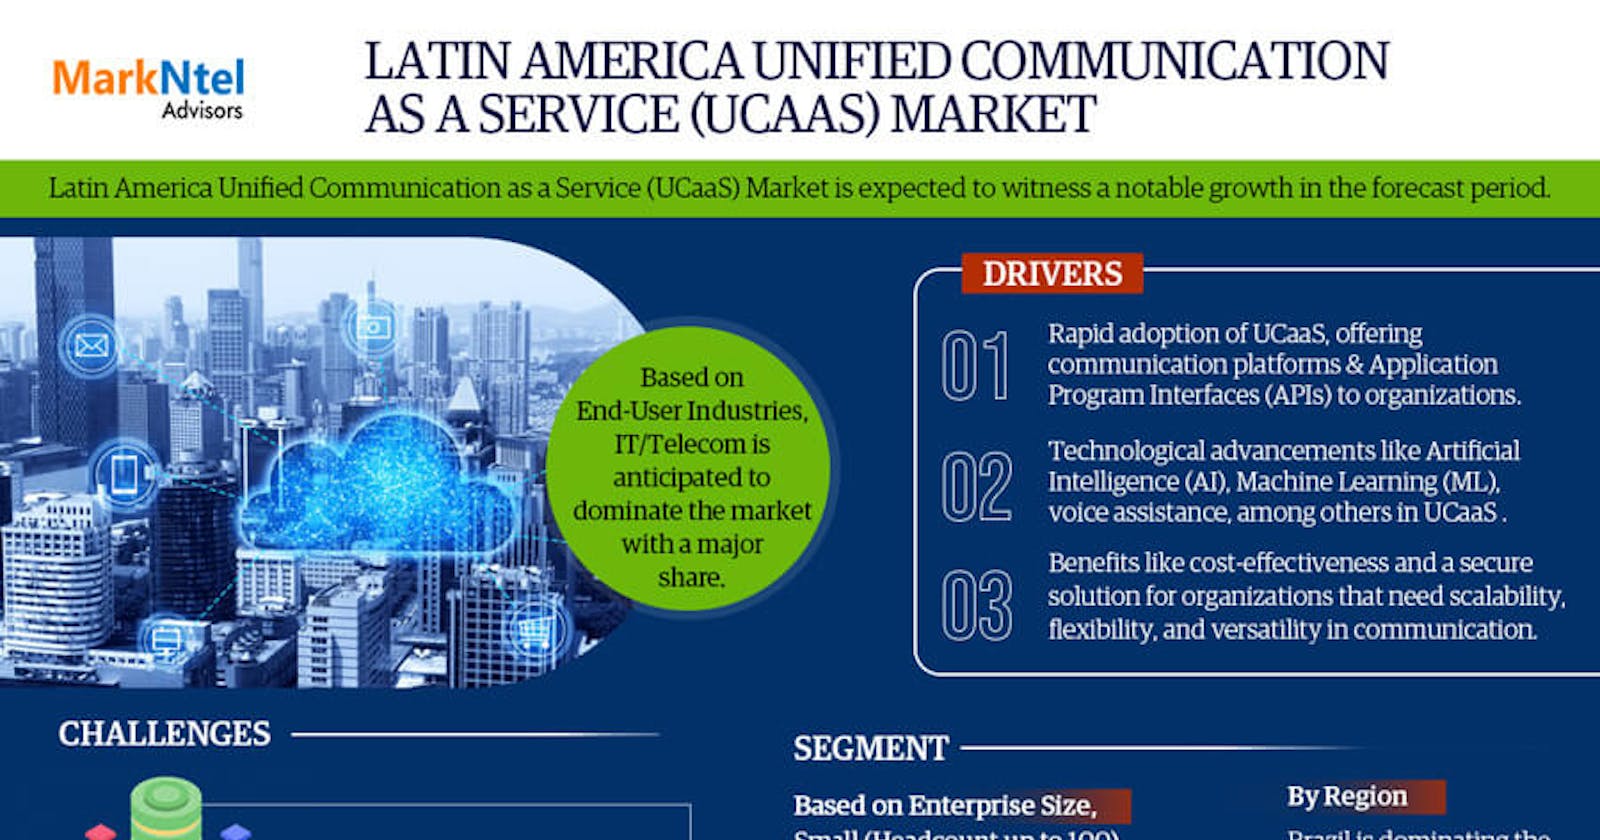 Latin America Unified Communications as a Service (UCaaS) Market Opportunities: Exploring CAGR Growth (2022-27)